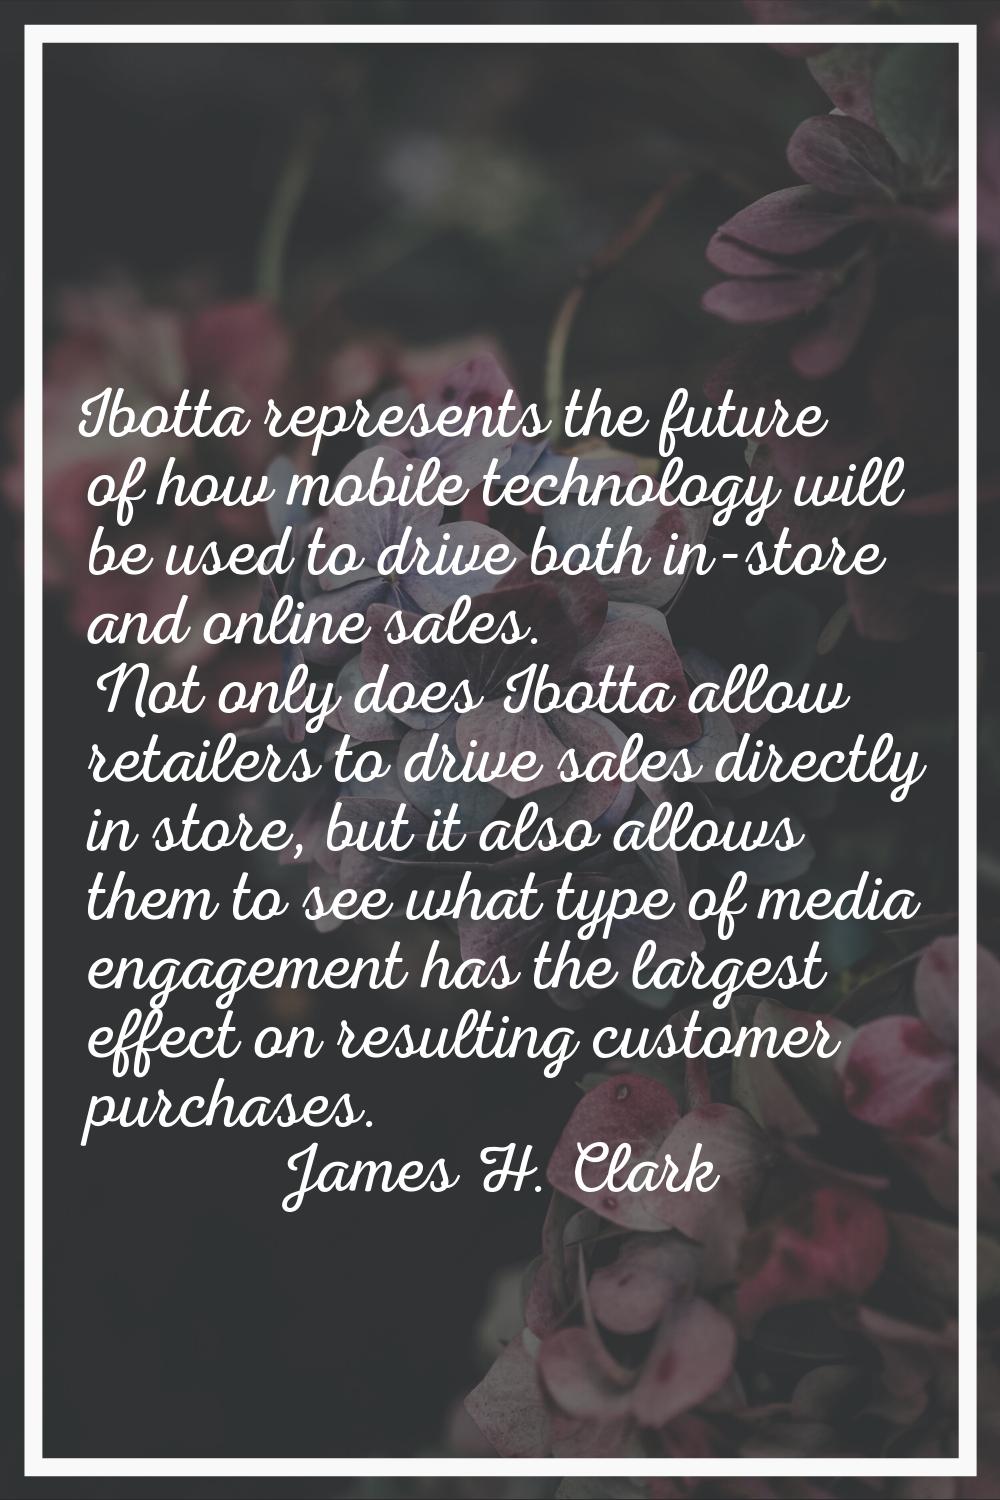 Ibotta represents the future of how mobile technology will be used to drive both in-store and onlin